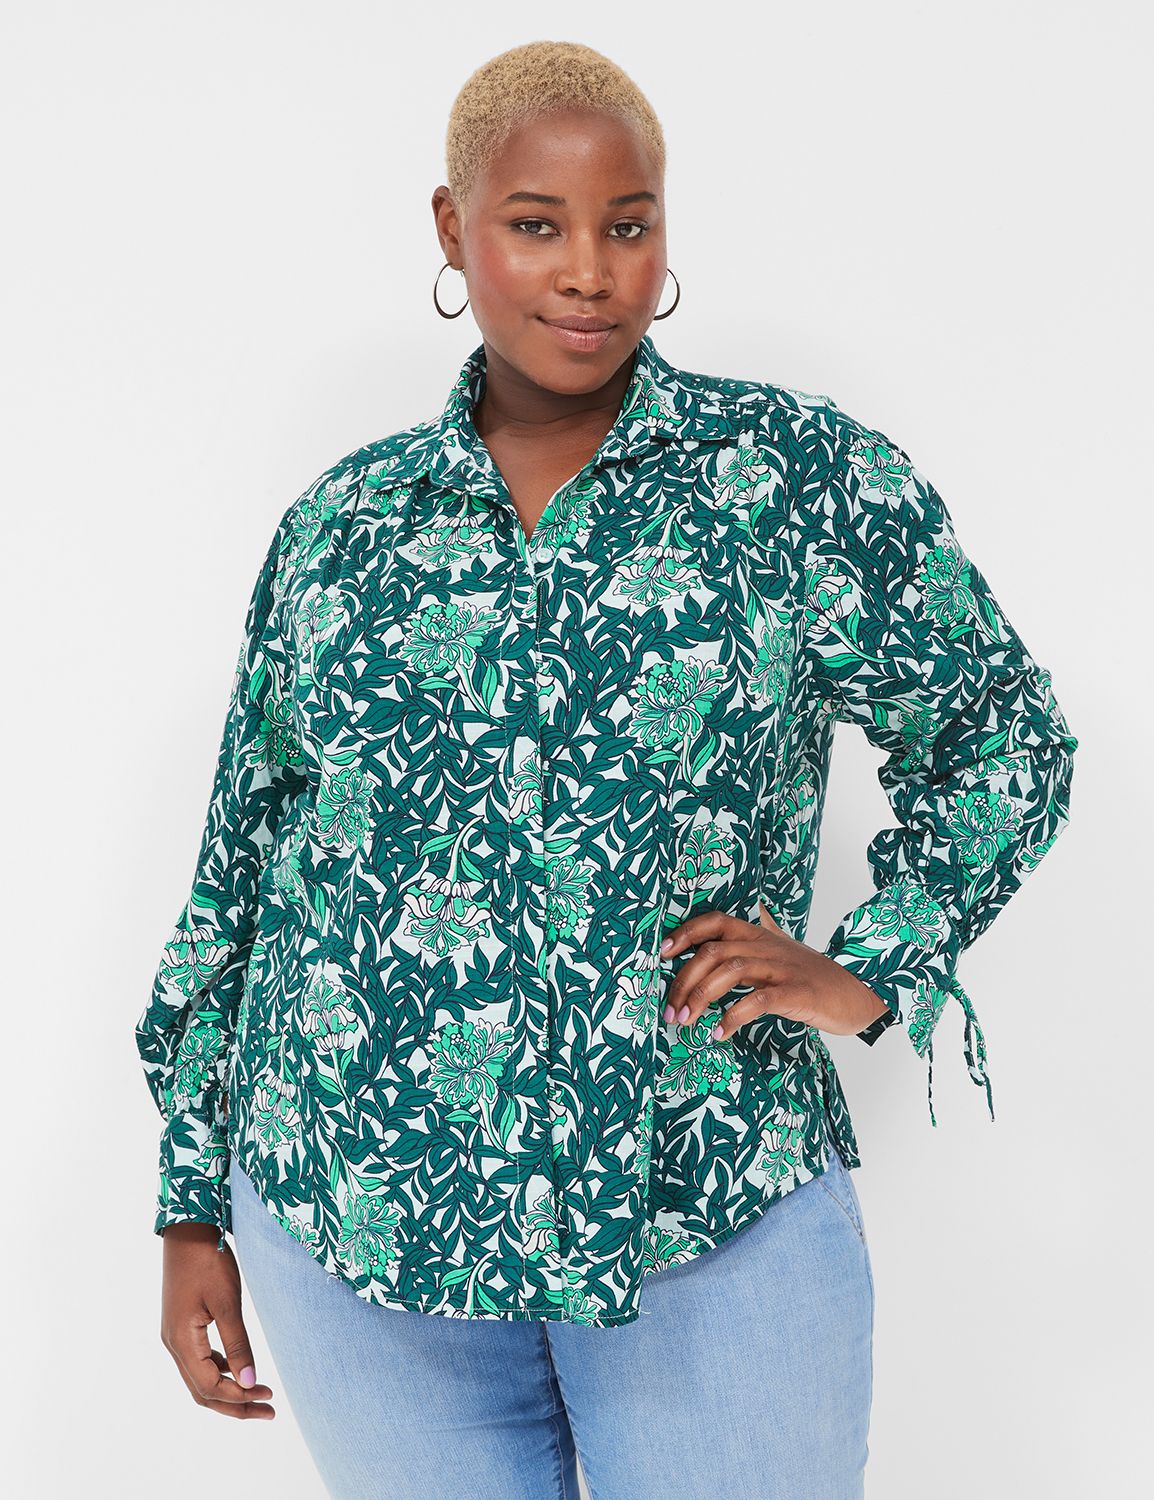 Size 42F Clearance Plus Size Clothing - On Sale Today